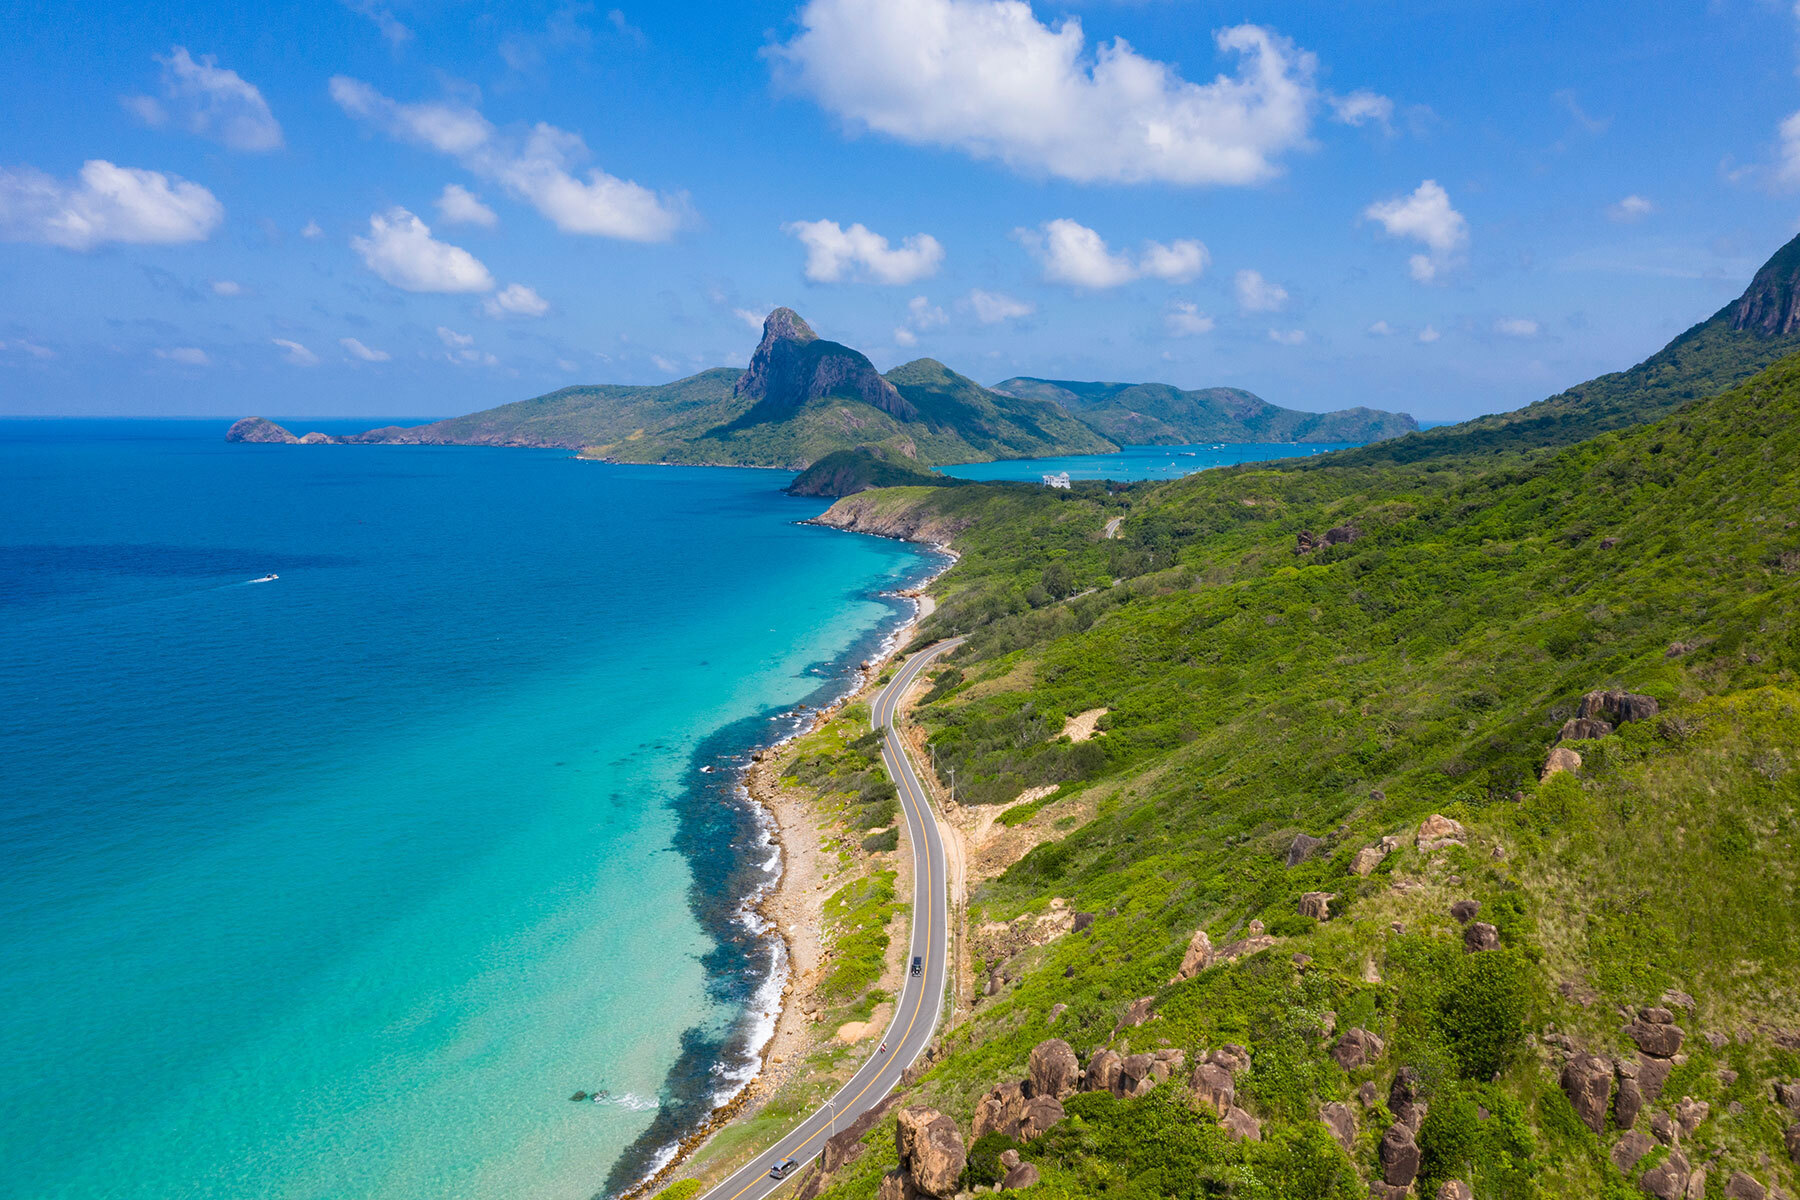 Con Dao Is One Of The World's Top 16 Islands For Vacations According To Travel Experts